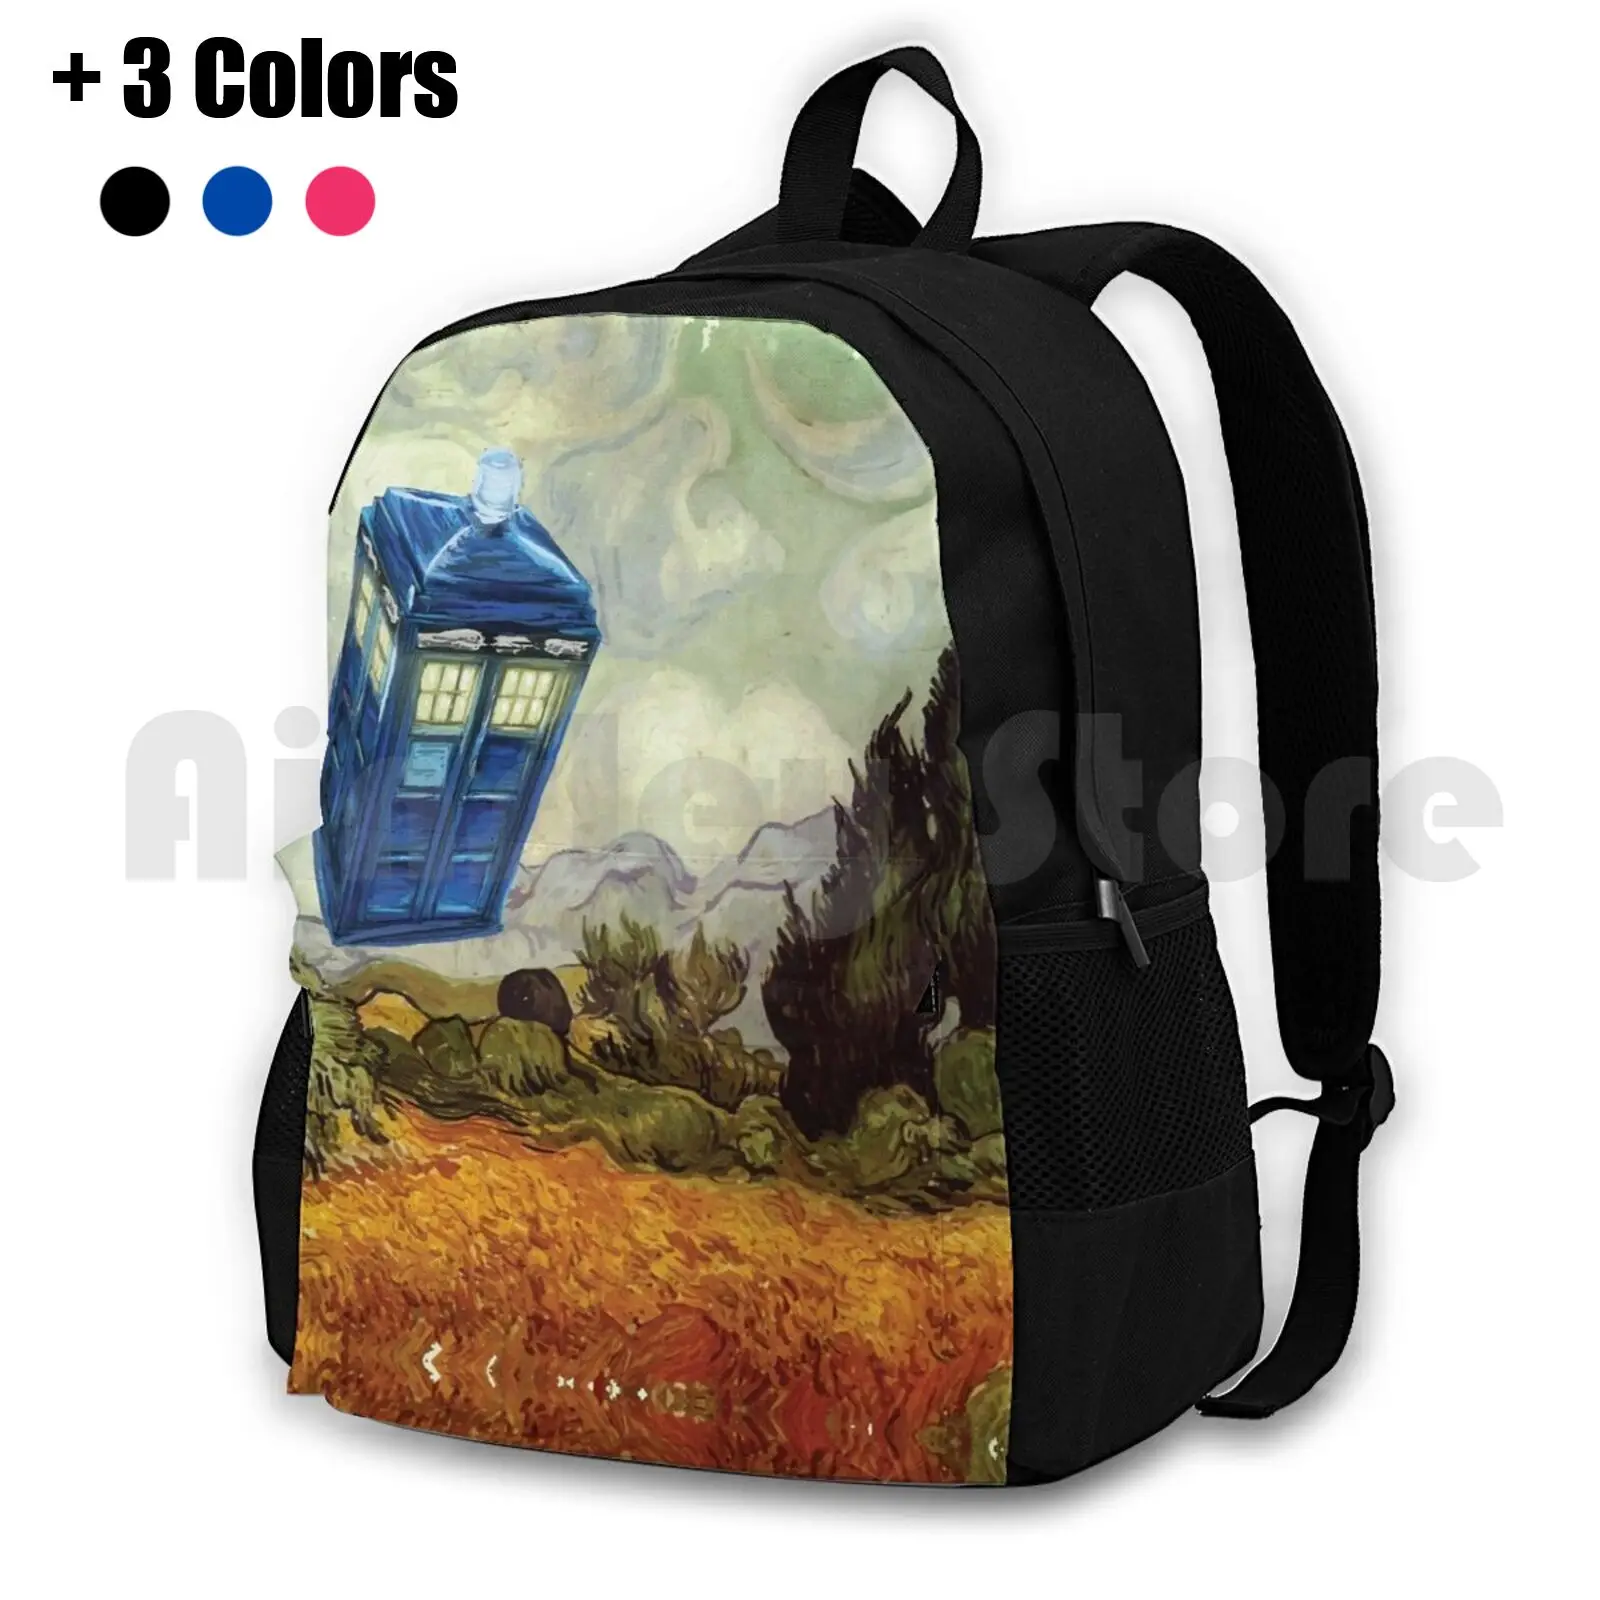 

Vincent And The Outdoor Hiking Backpack Waterproof Camping Travel Science Fiction Sci Fi Nerds Geeky Nerd Culture Nerdy Nerdy